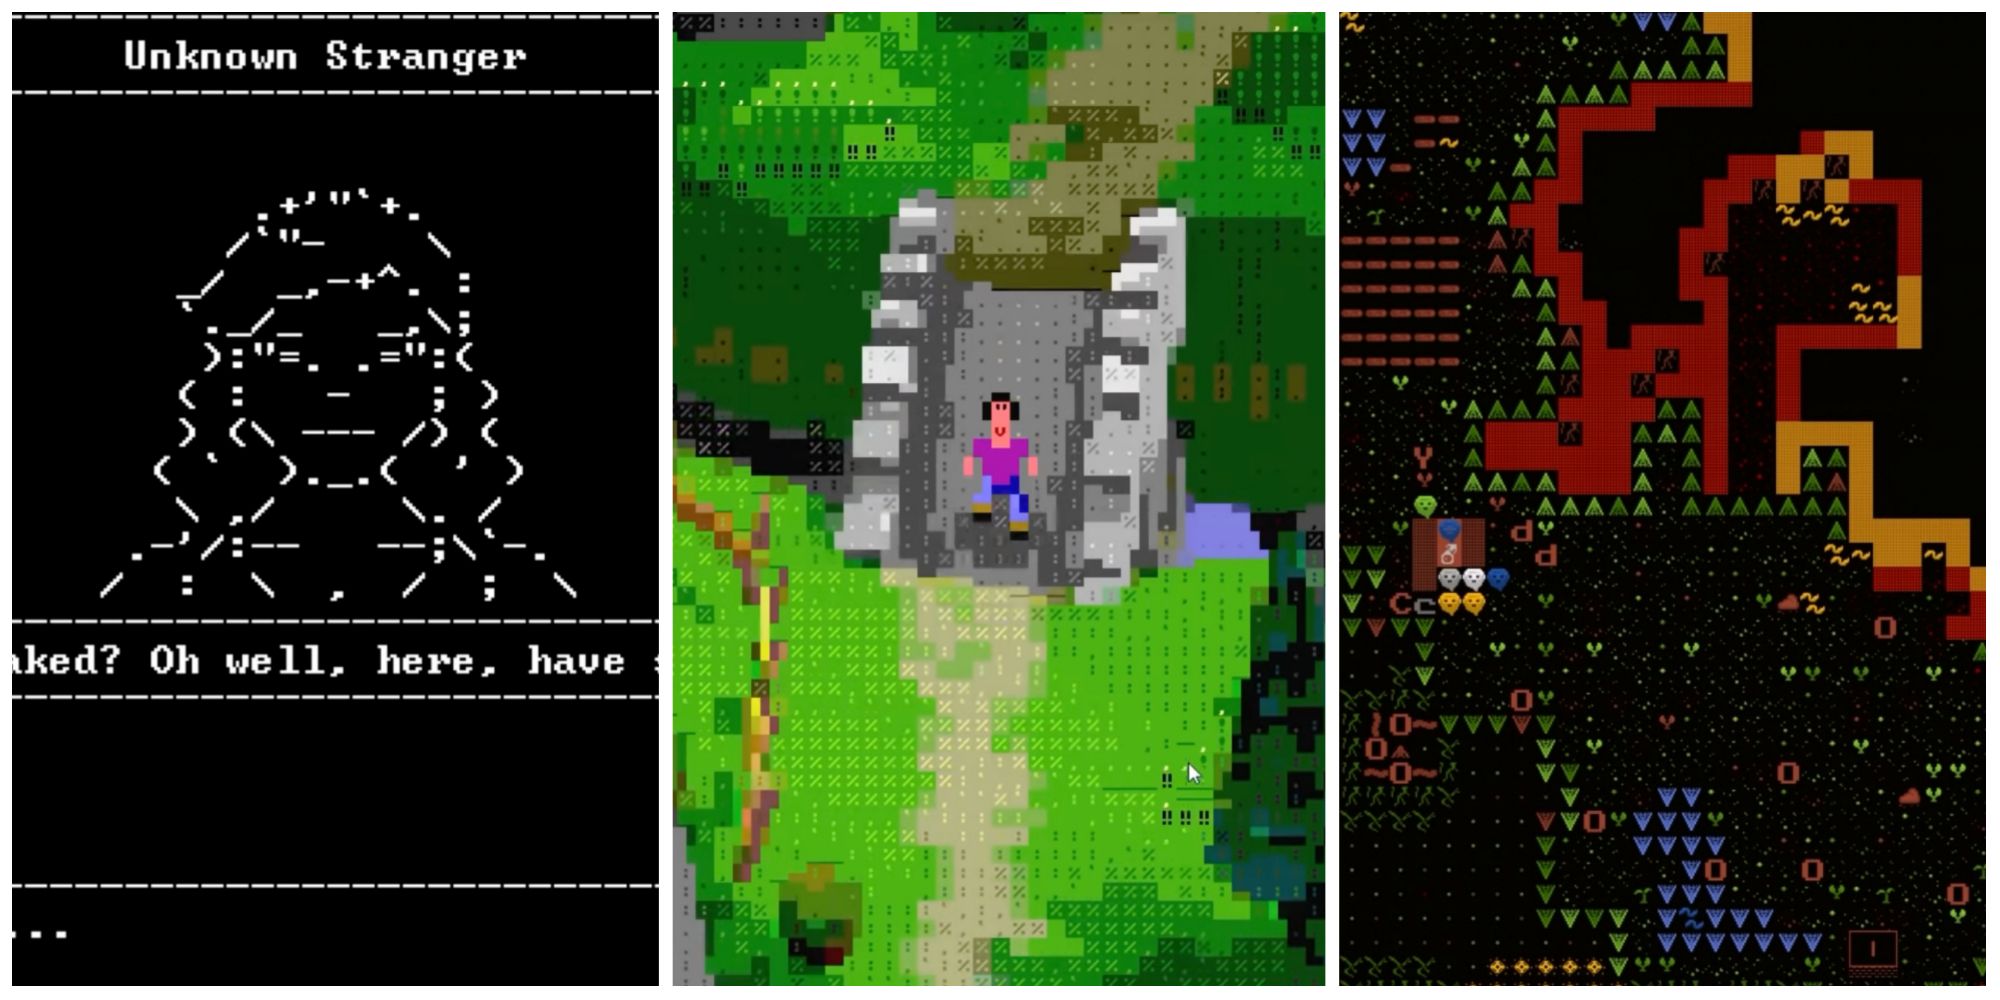 A collage of images from SanctuaryRPG, ASCIICKER, and Dwarf Fortress